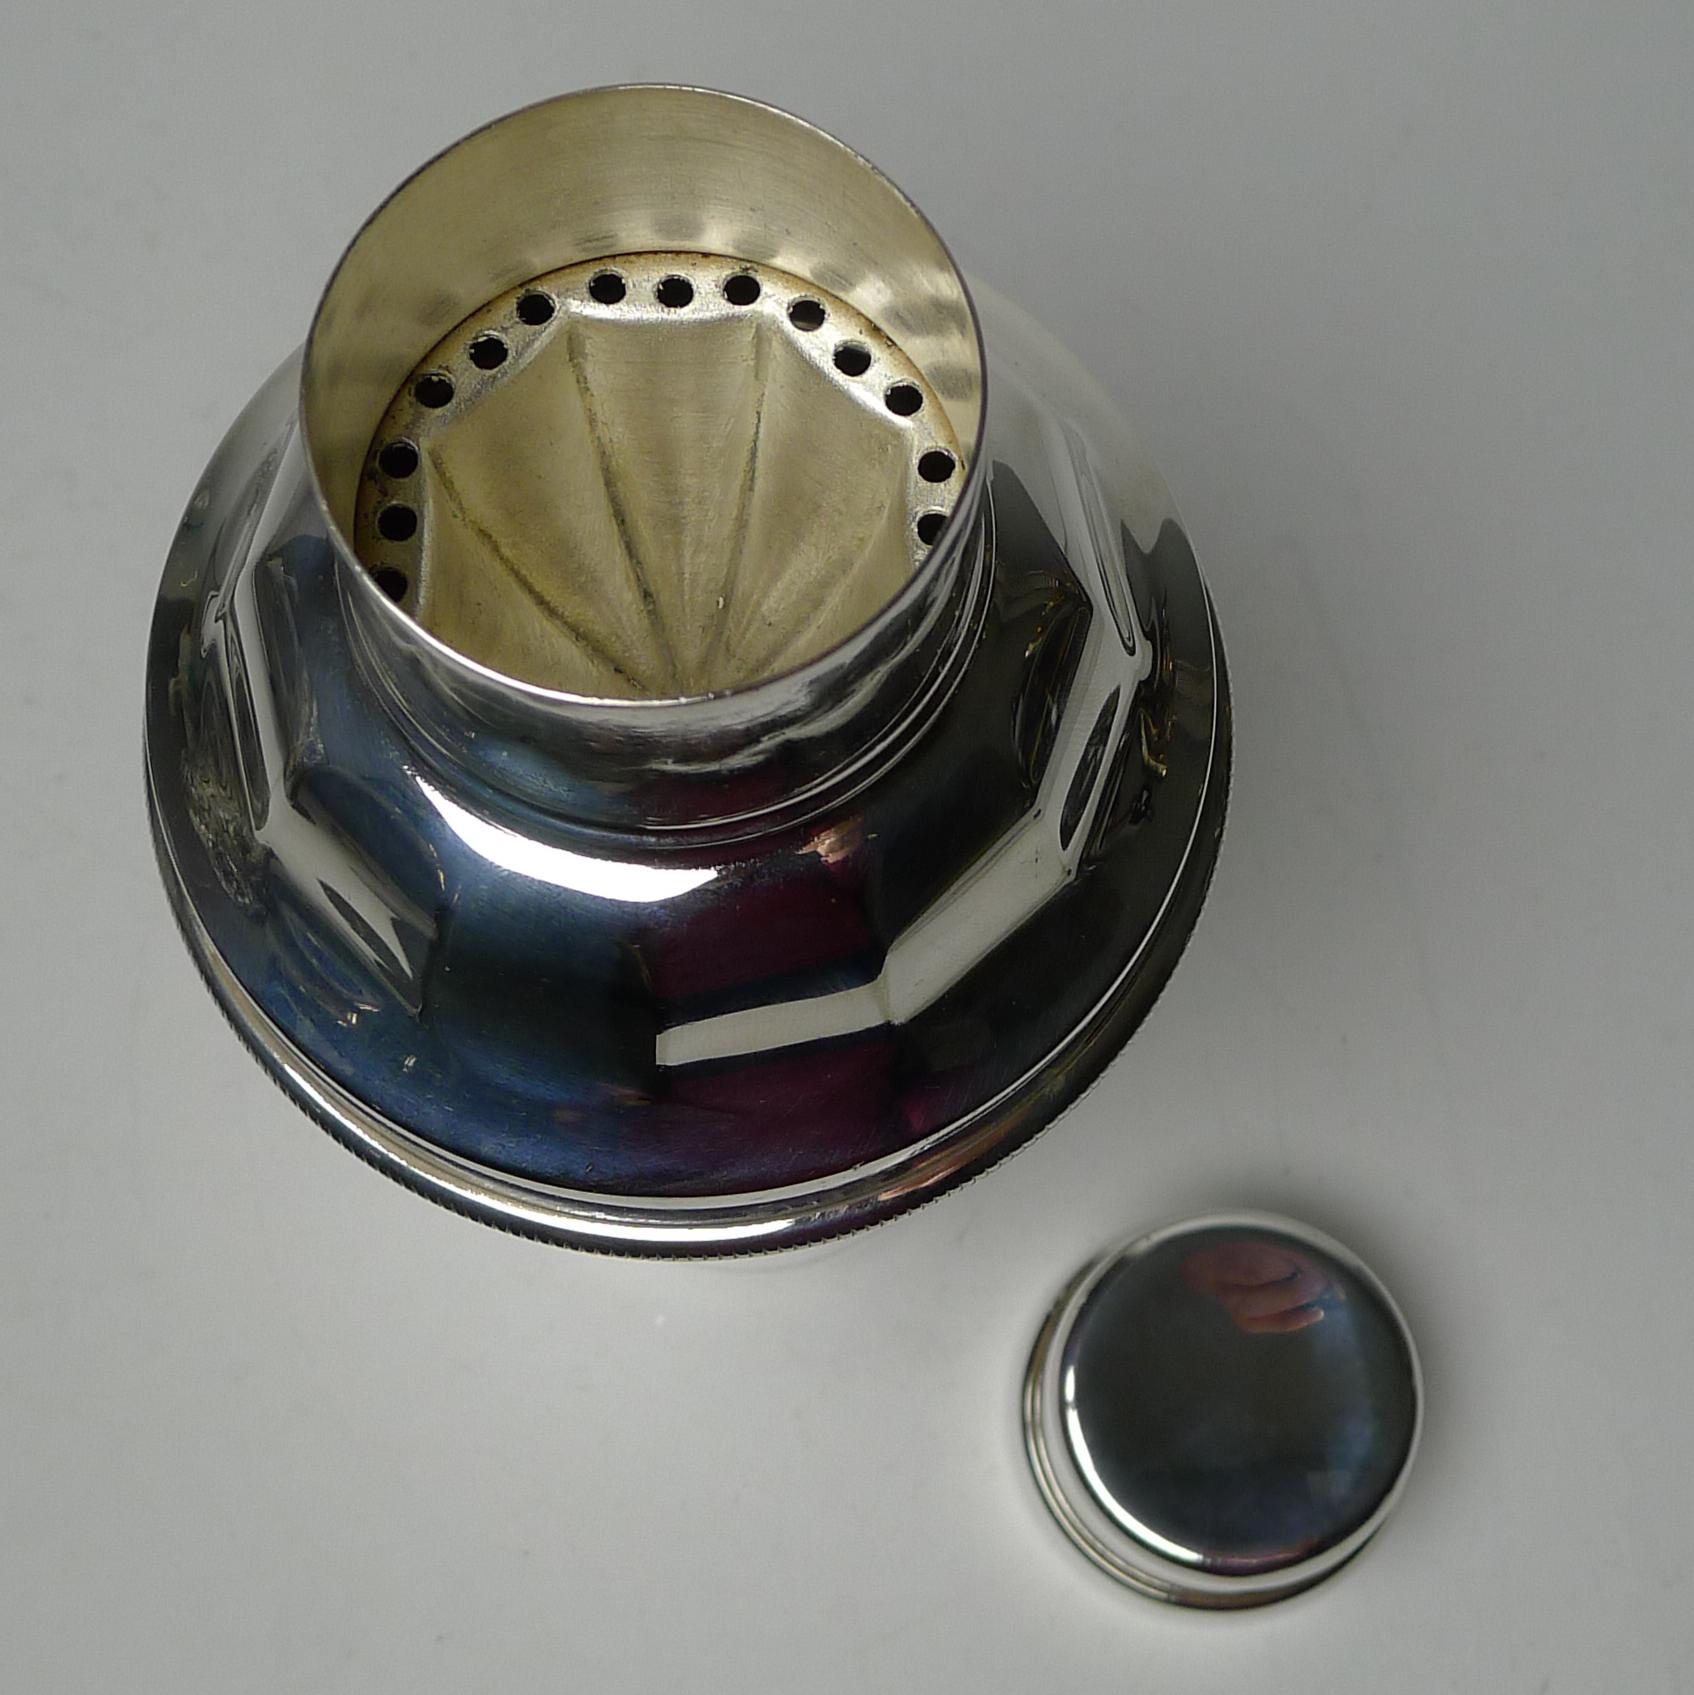 Mid-20th Century English Art Deco Cocktail Shaker with Integral Lemon Squeezer, circa 1940 For Sale